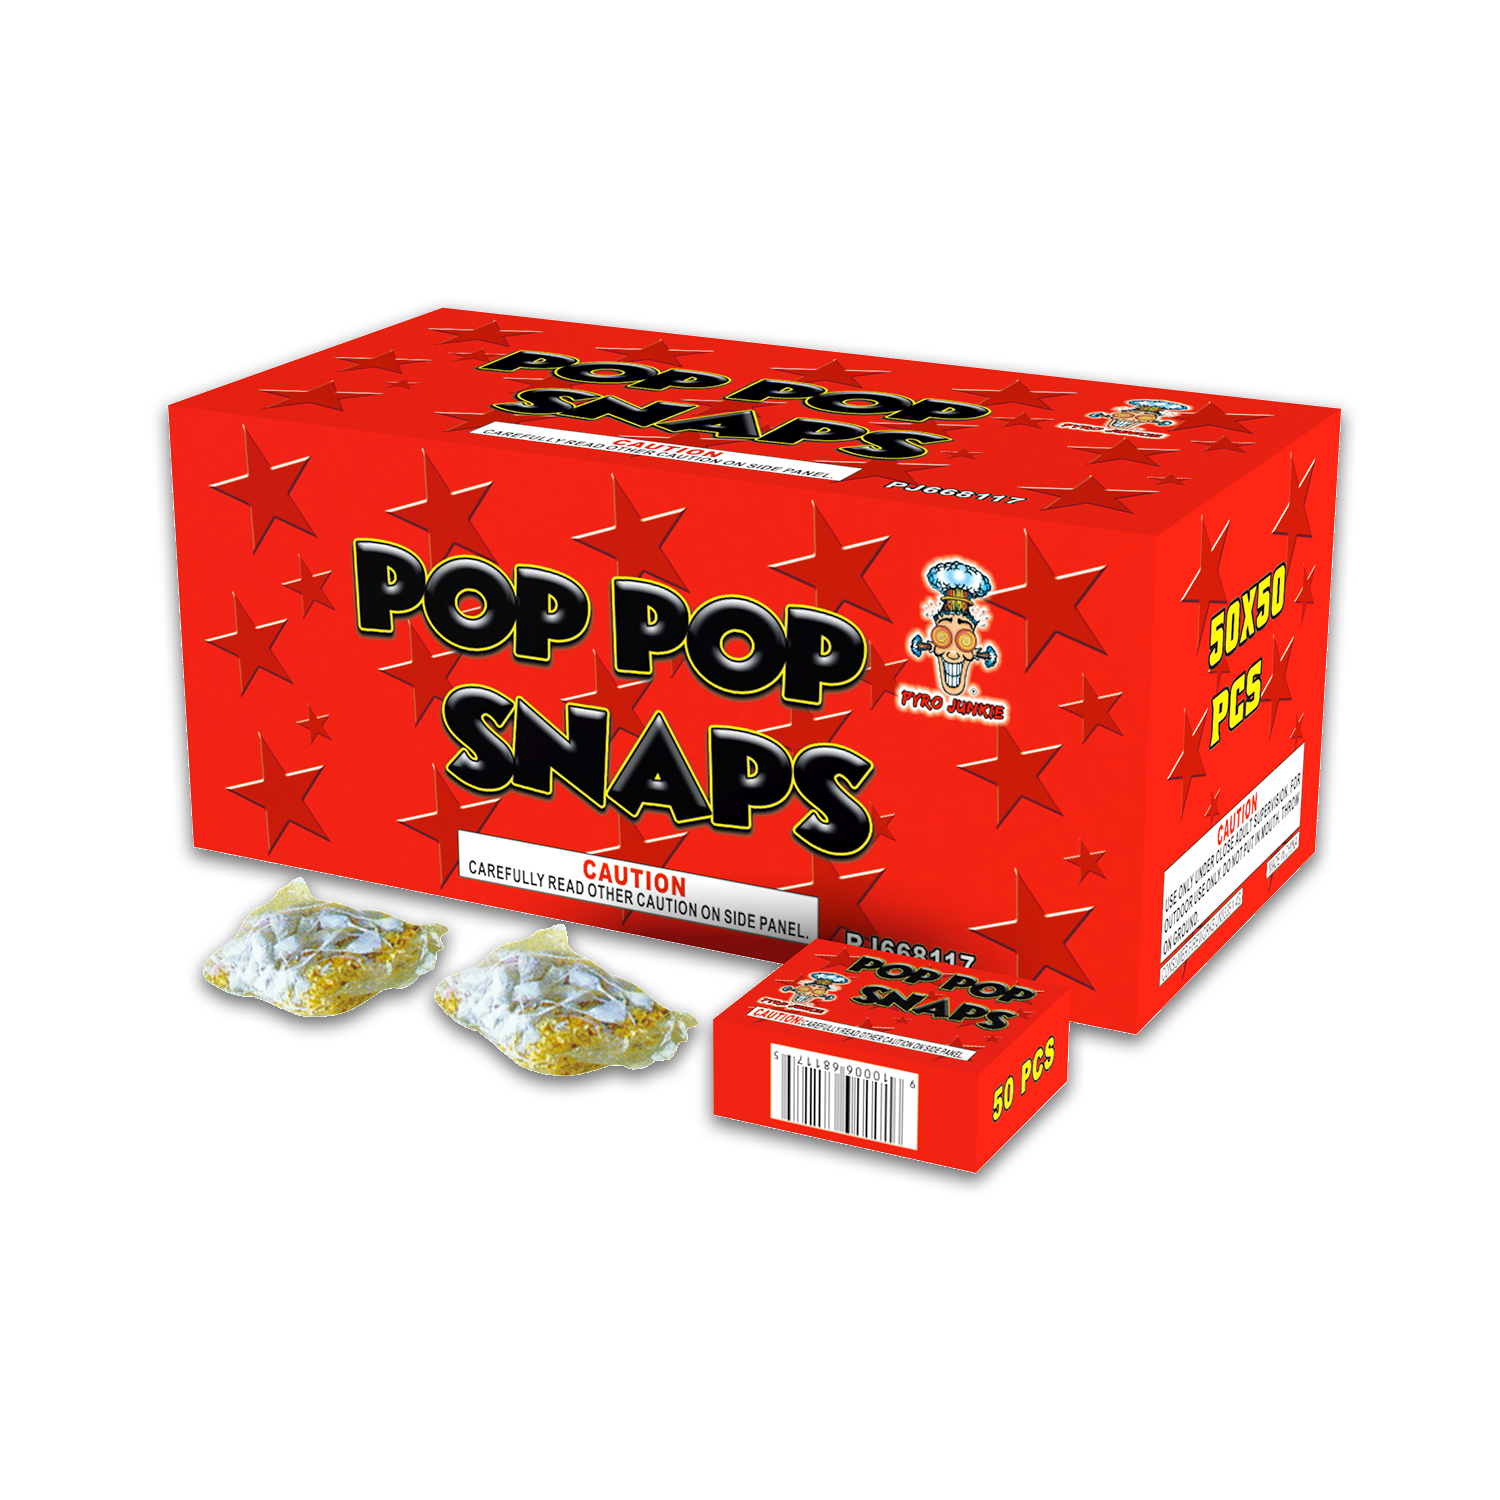 POP POP SNAPPERS - SMALL BY PJ(6/50/50)